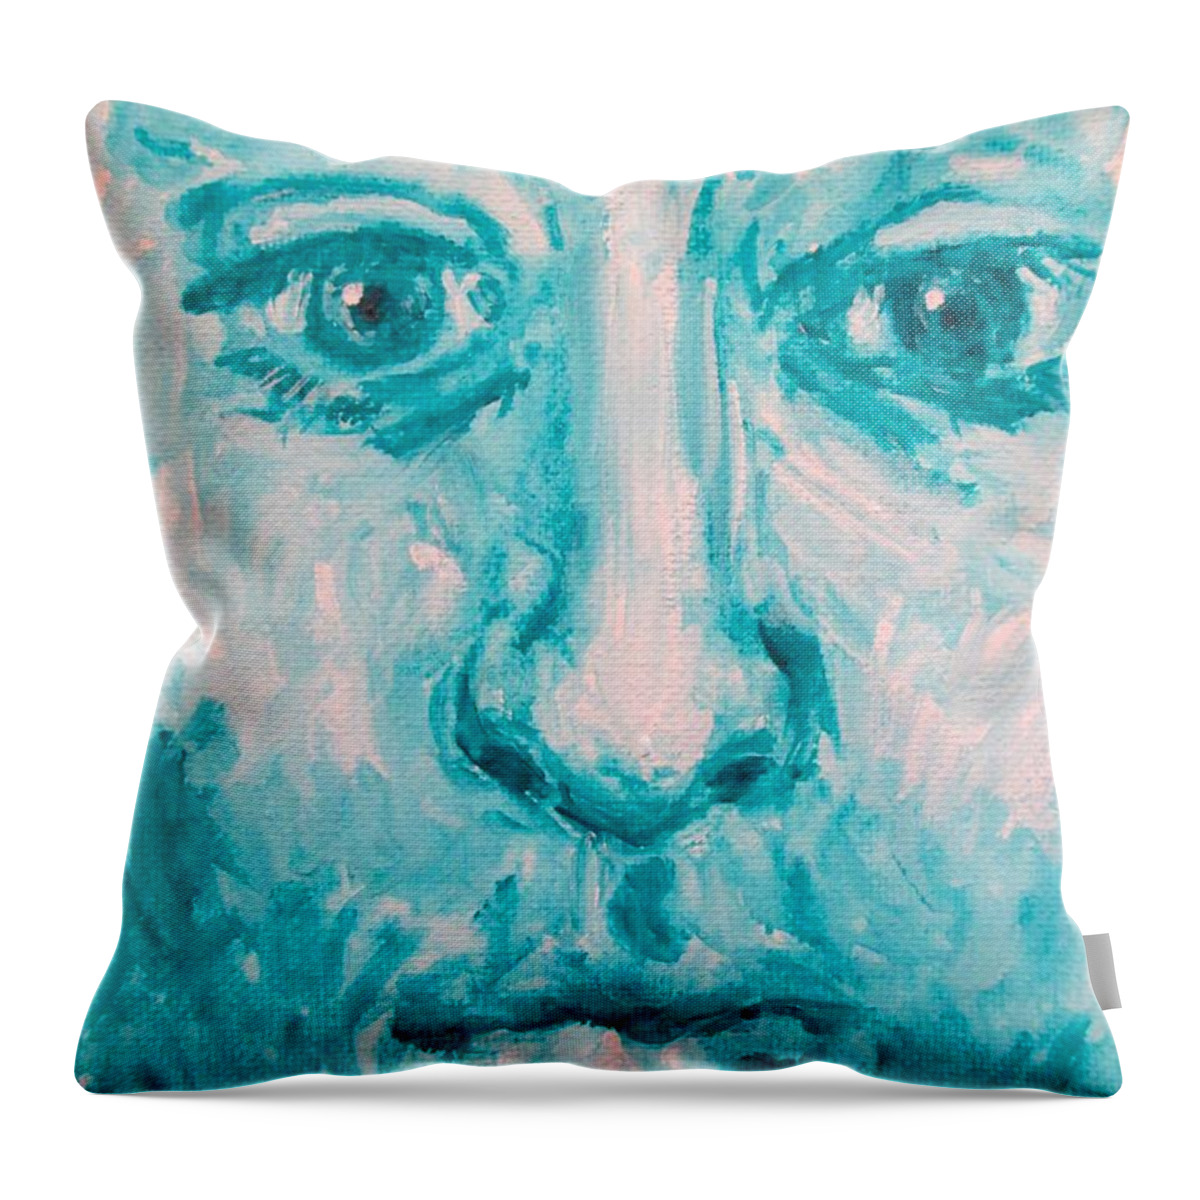 Face Throw Pillow featuring the painting Searching by Kendall Kessler